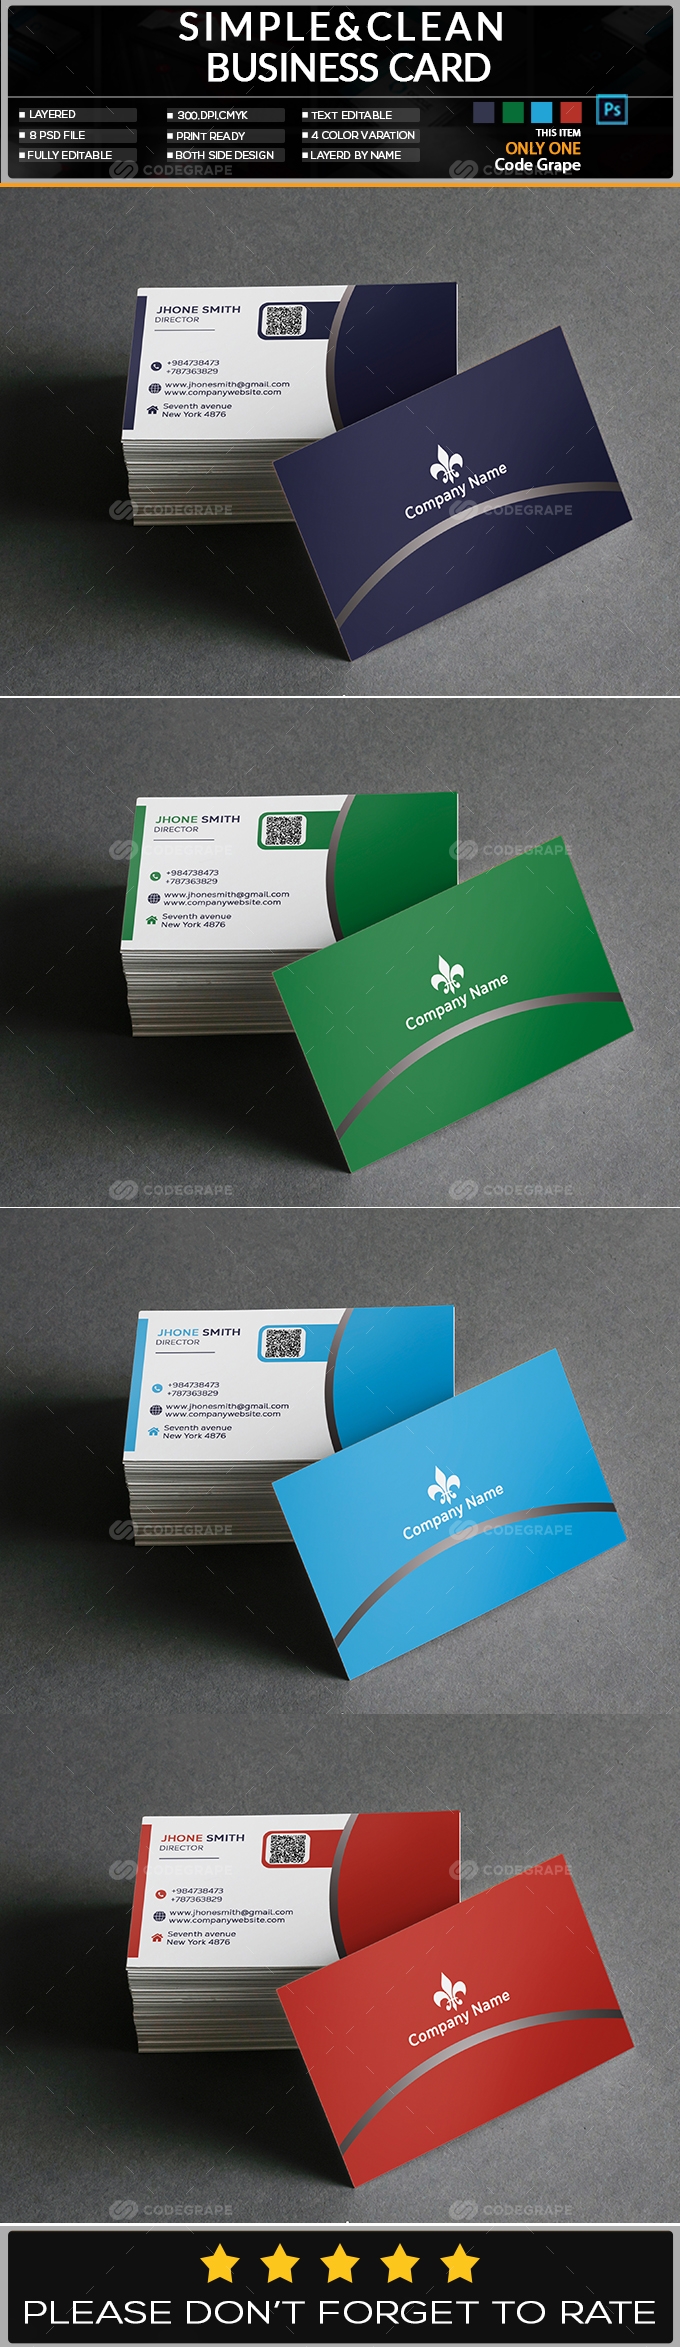 Simple & clean business card